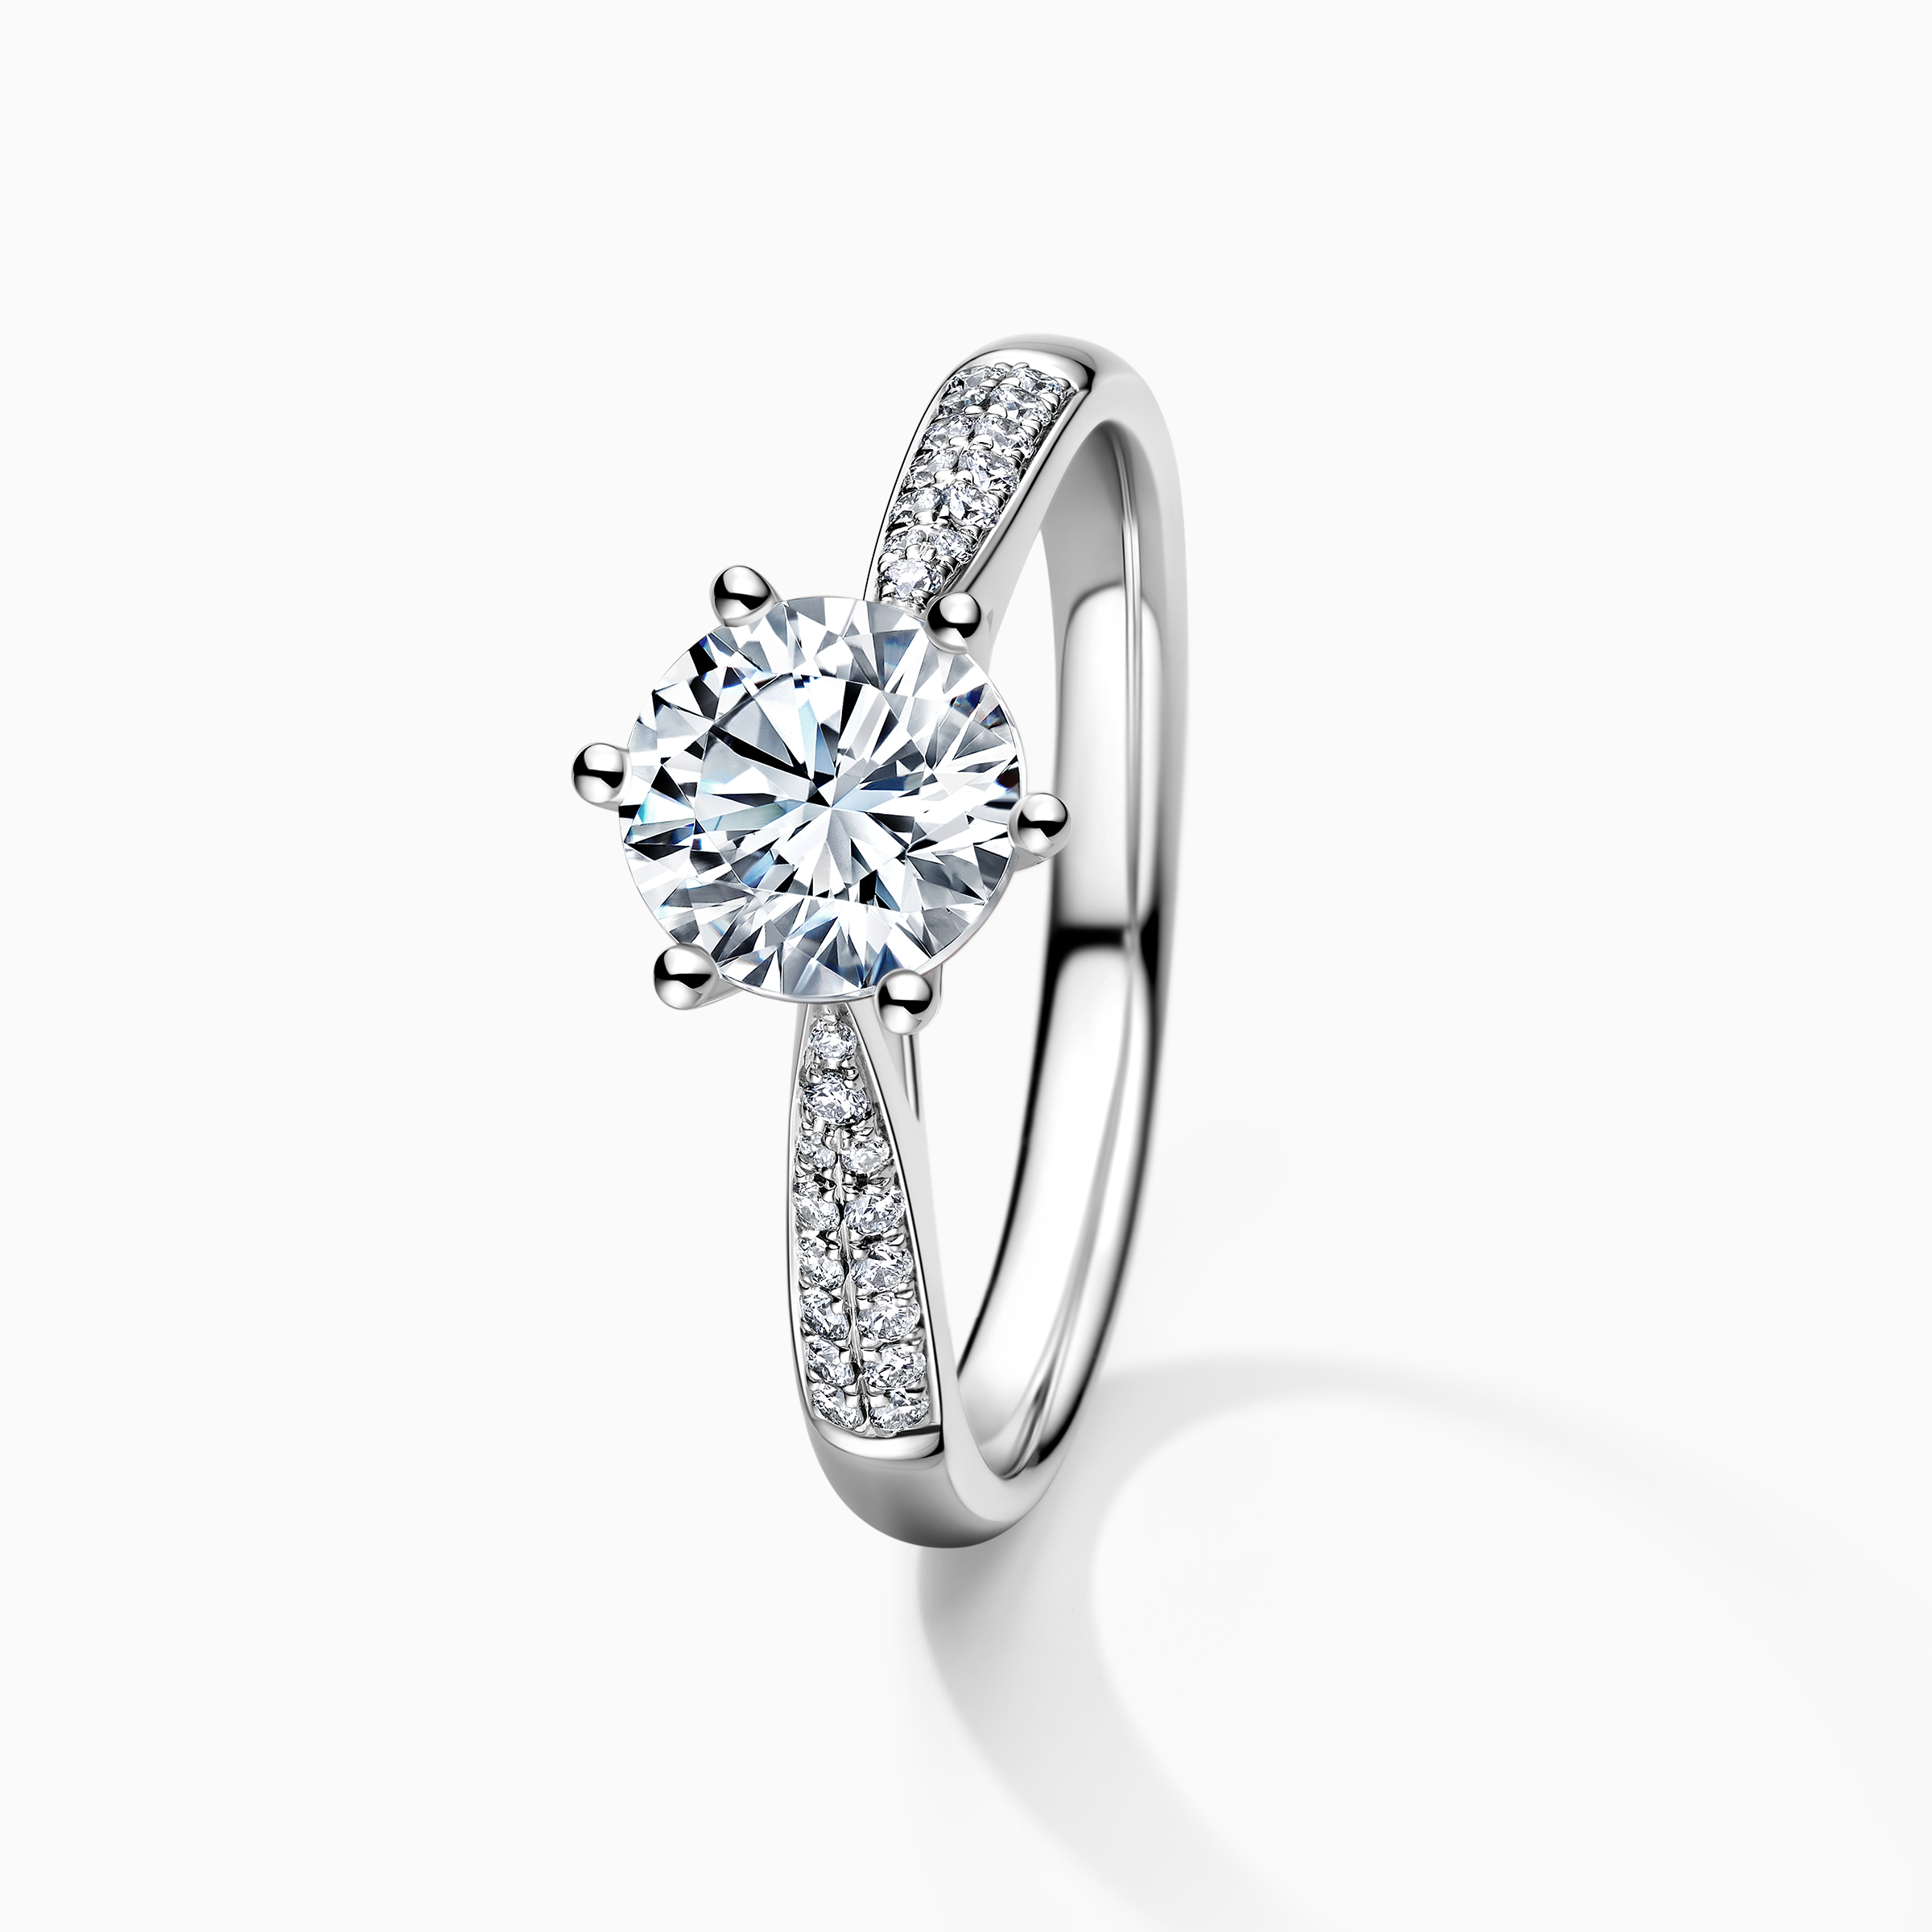 Darry Ring diamond band engagement ring front view